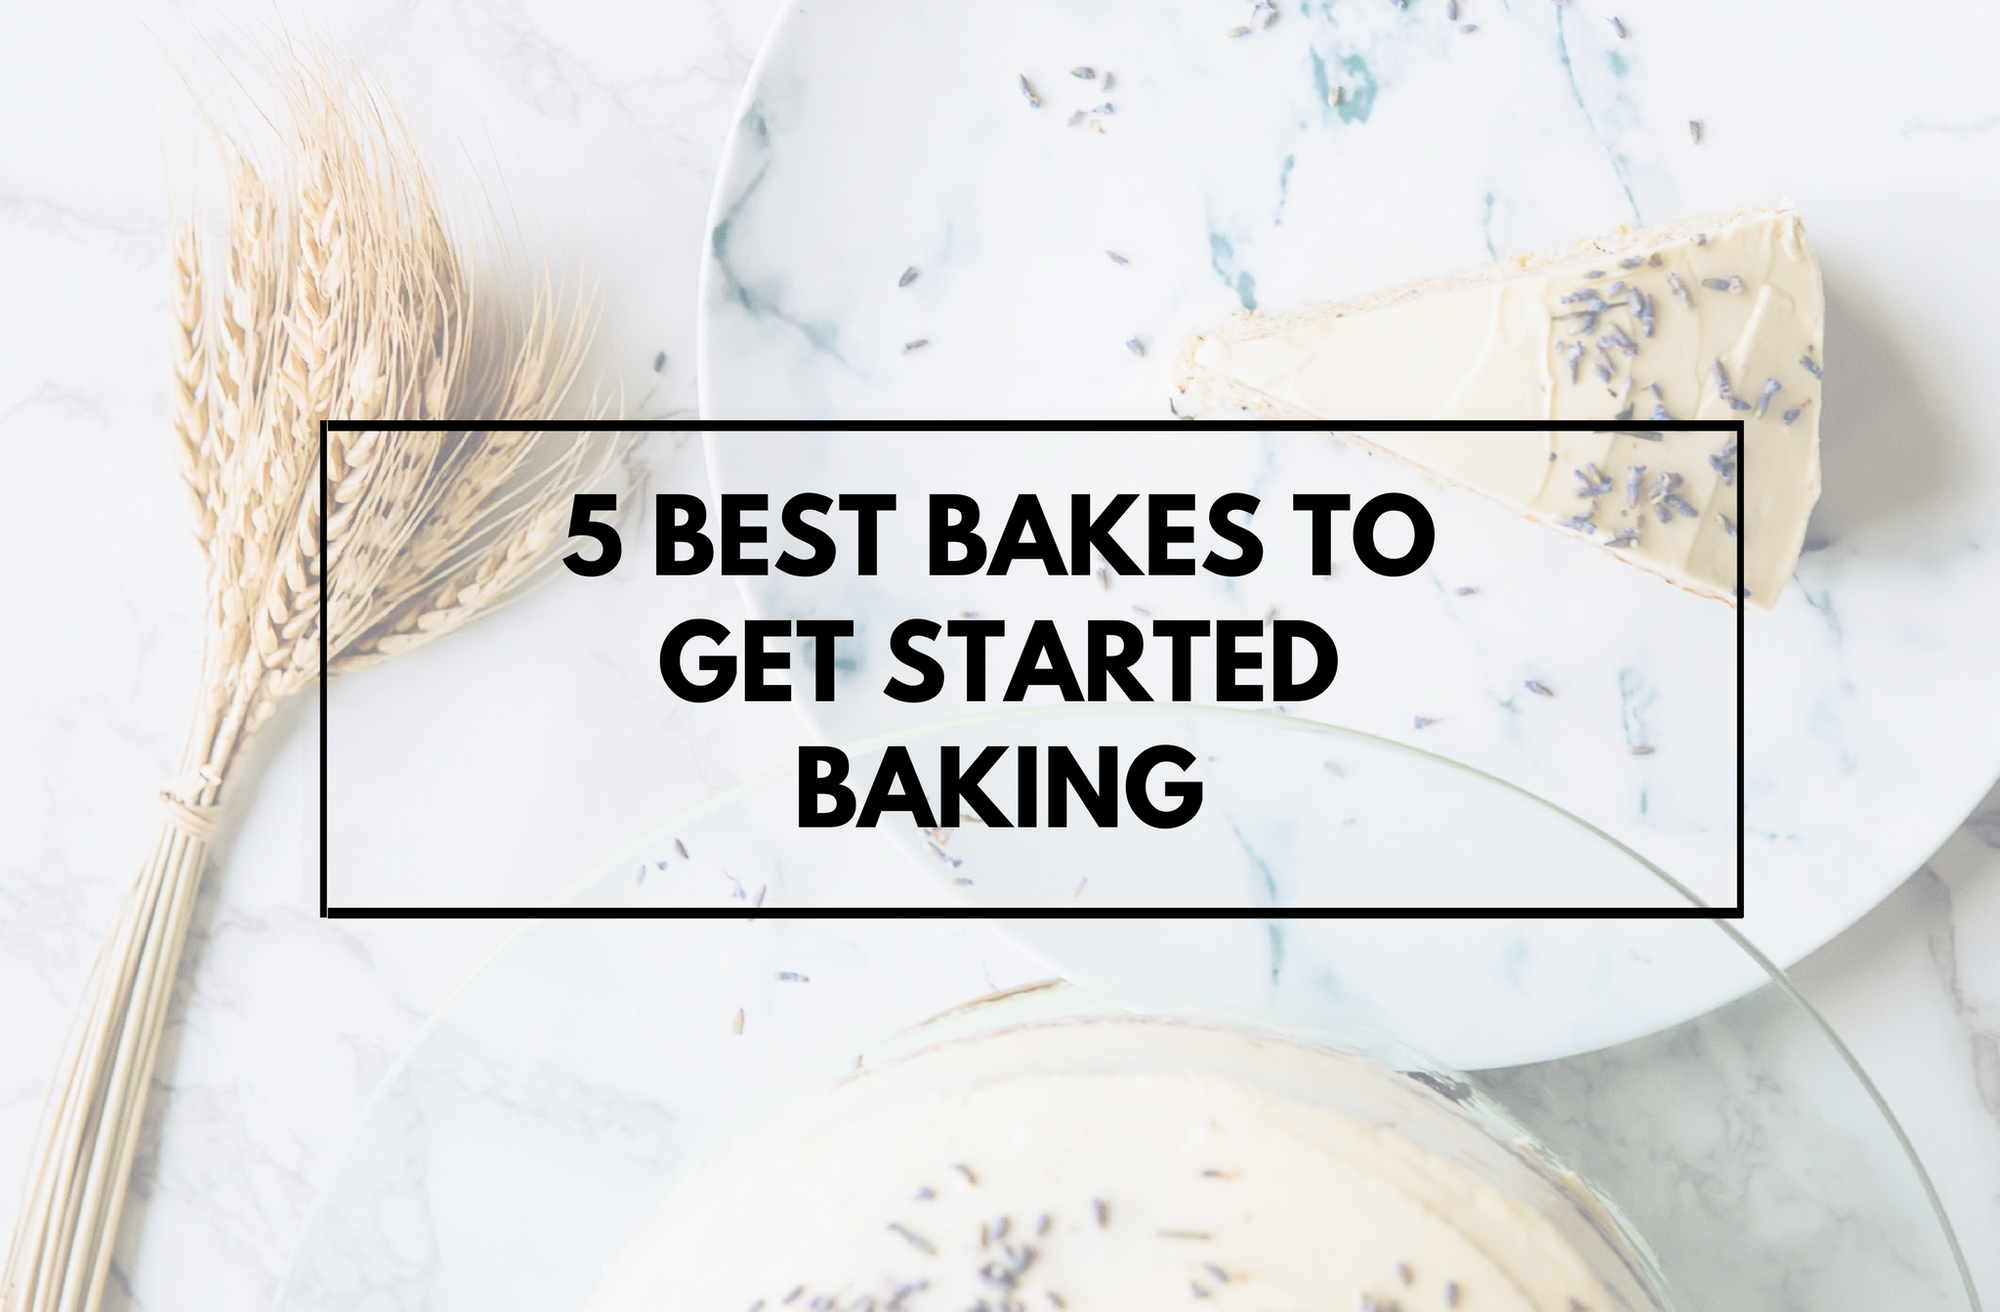 5 Best Bakes to Get Started Baking